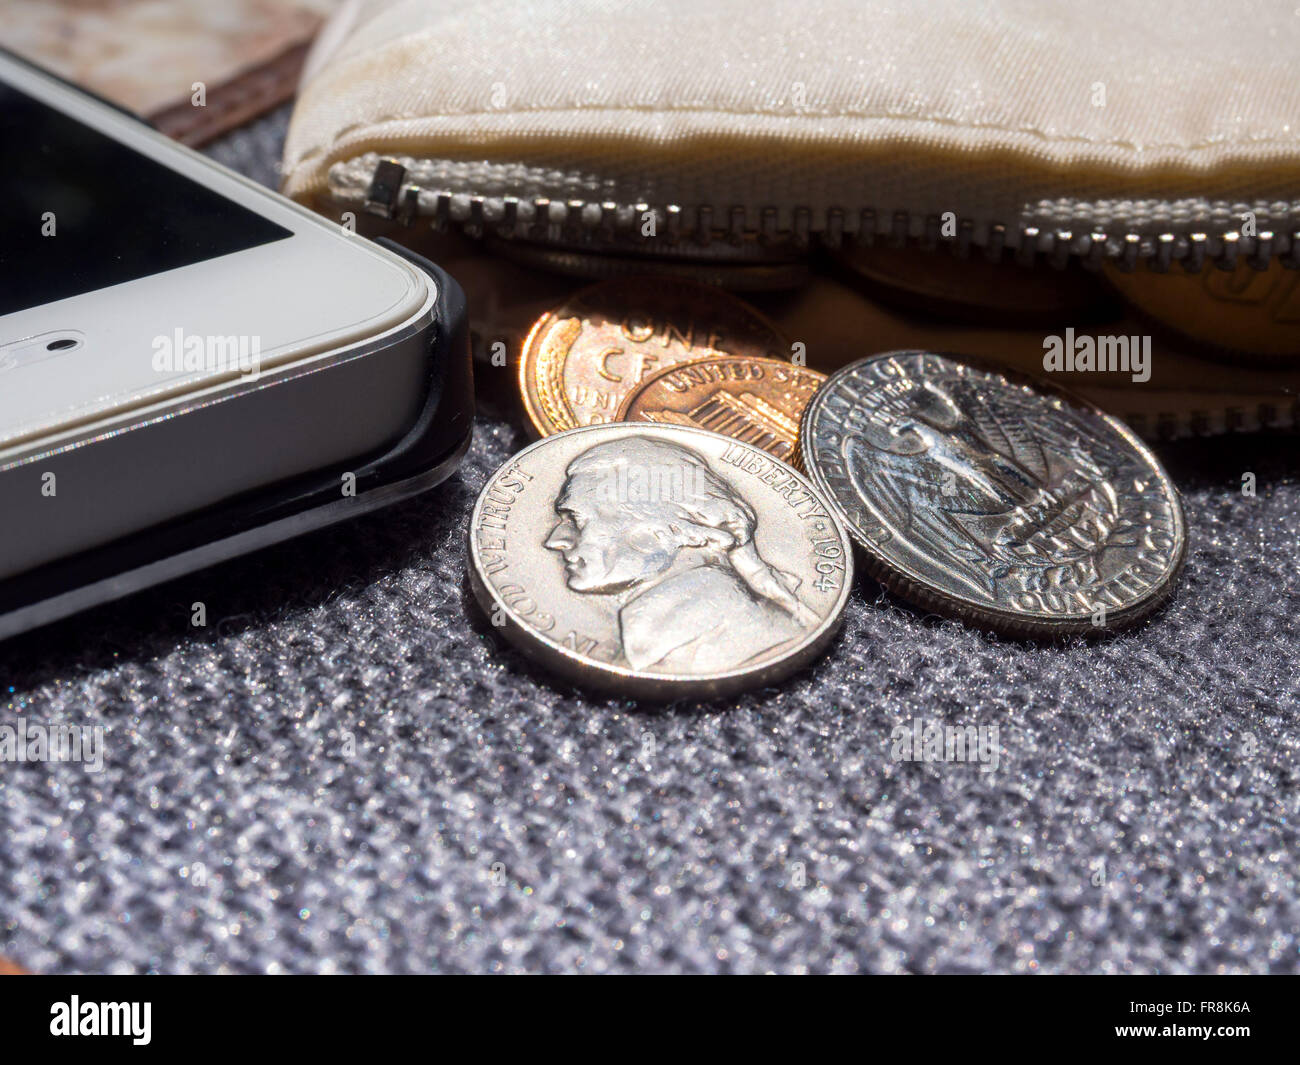 US dollar coins placed outside the wallet with smartphone. Stock Photo